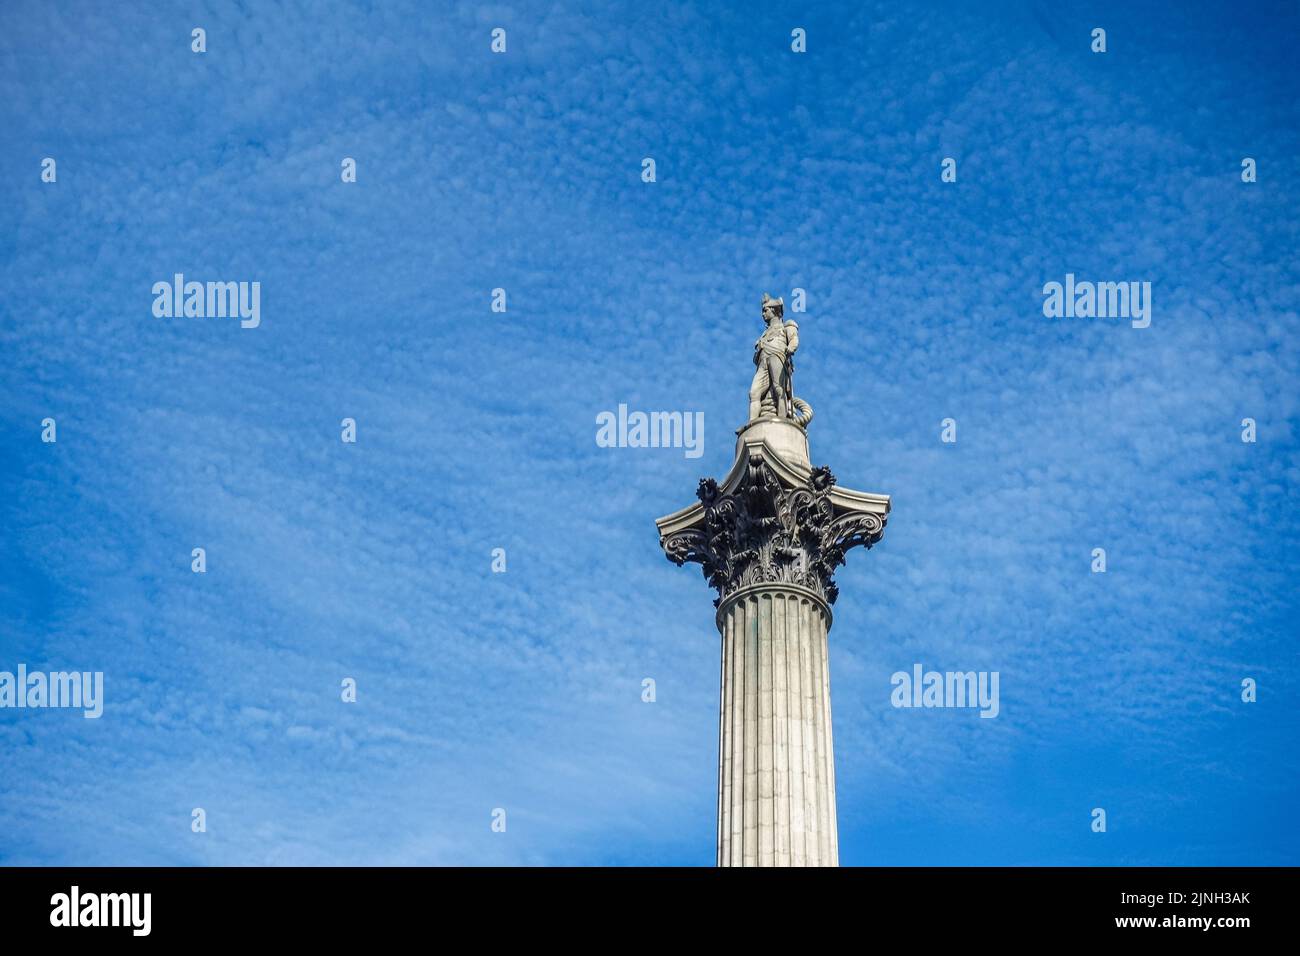 London, UK- July 4, 2022: Trafalgar Square. Nelson on top of his column, isolated against spotted blue cloudscape. Stock Photo